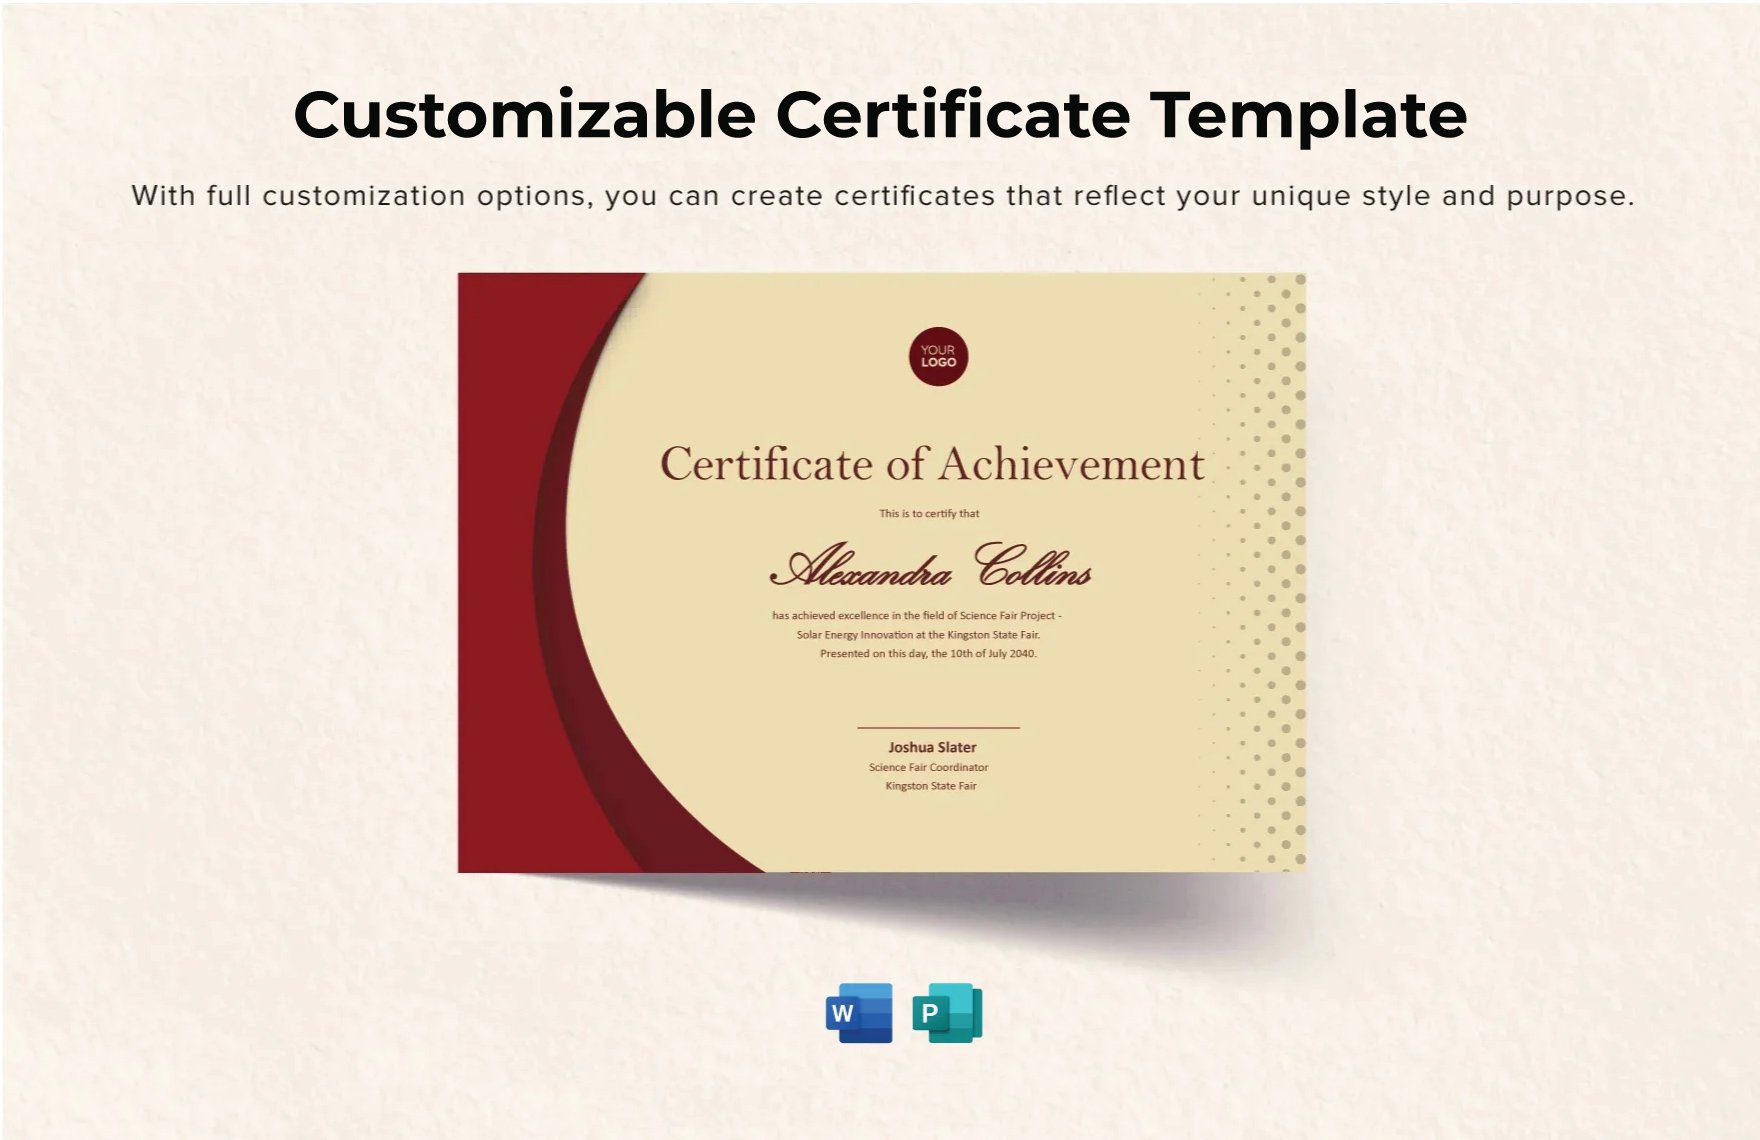 Free Customizable Certificate Template in Word, Publisher